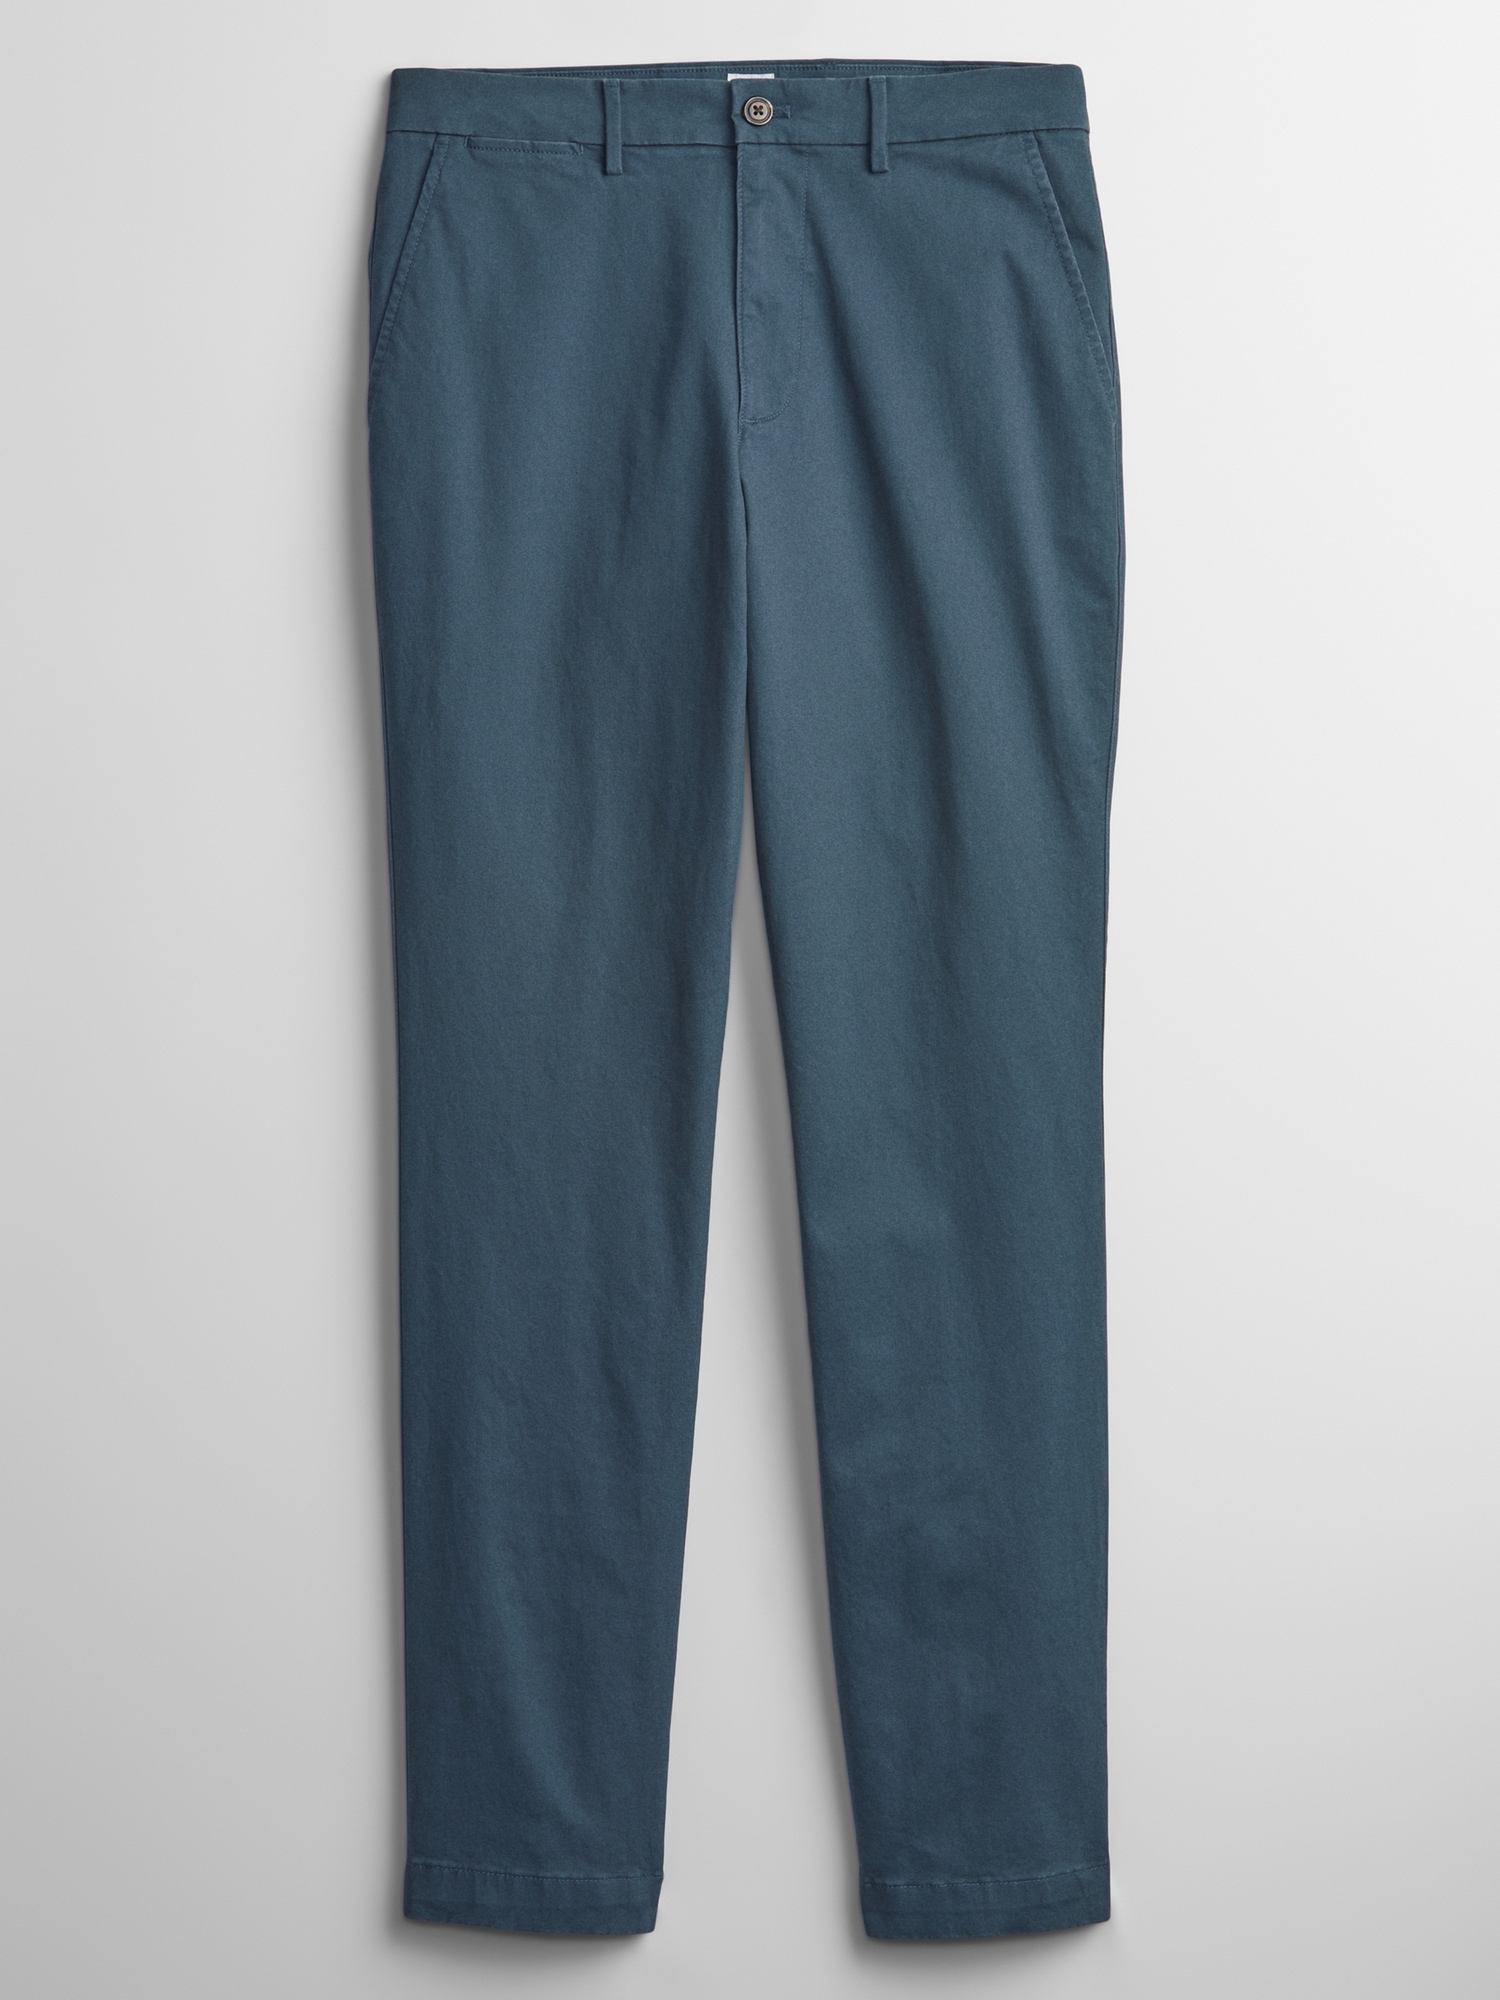 Slim GapFlex Soft Wear Jeans with Washwell by Gap Online, THE ICONIC